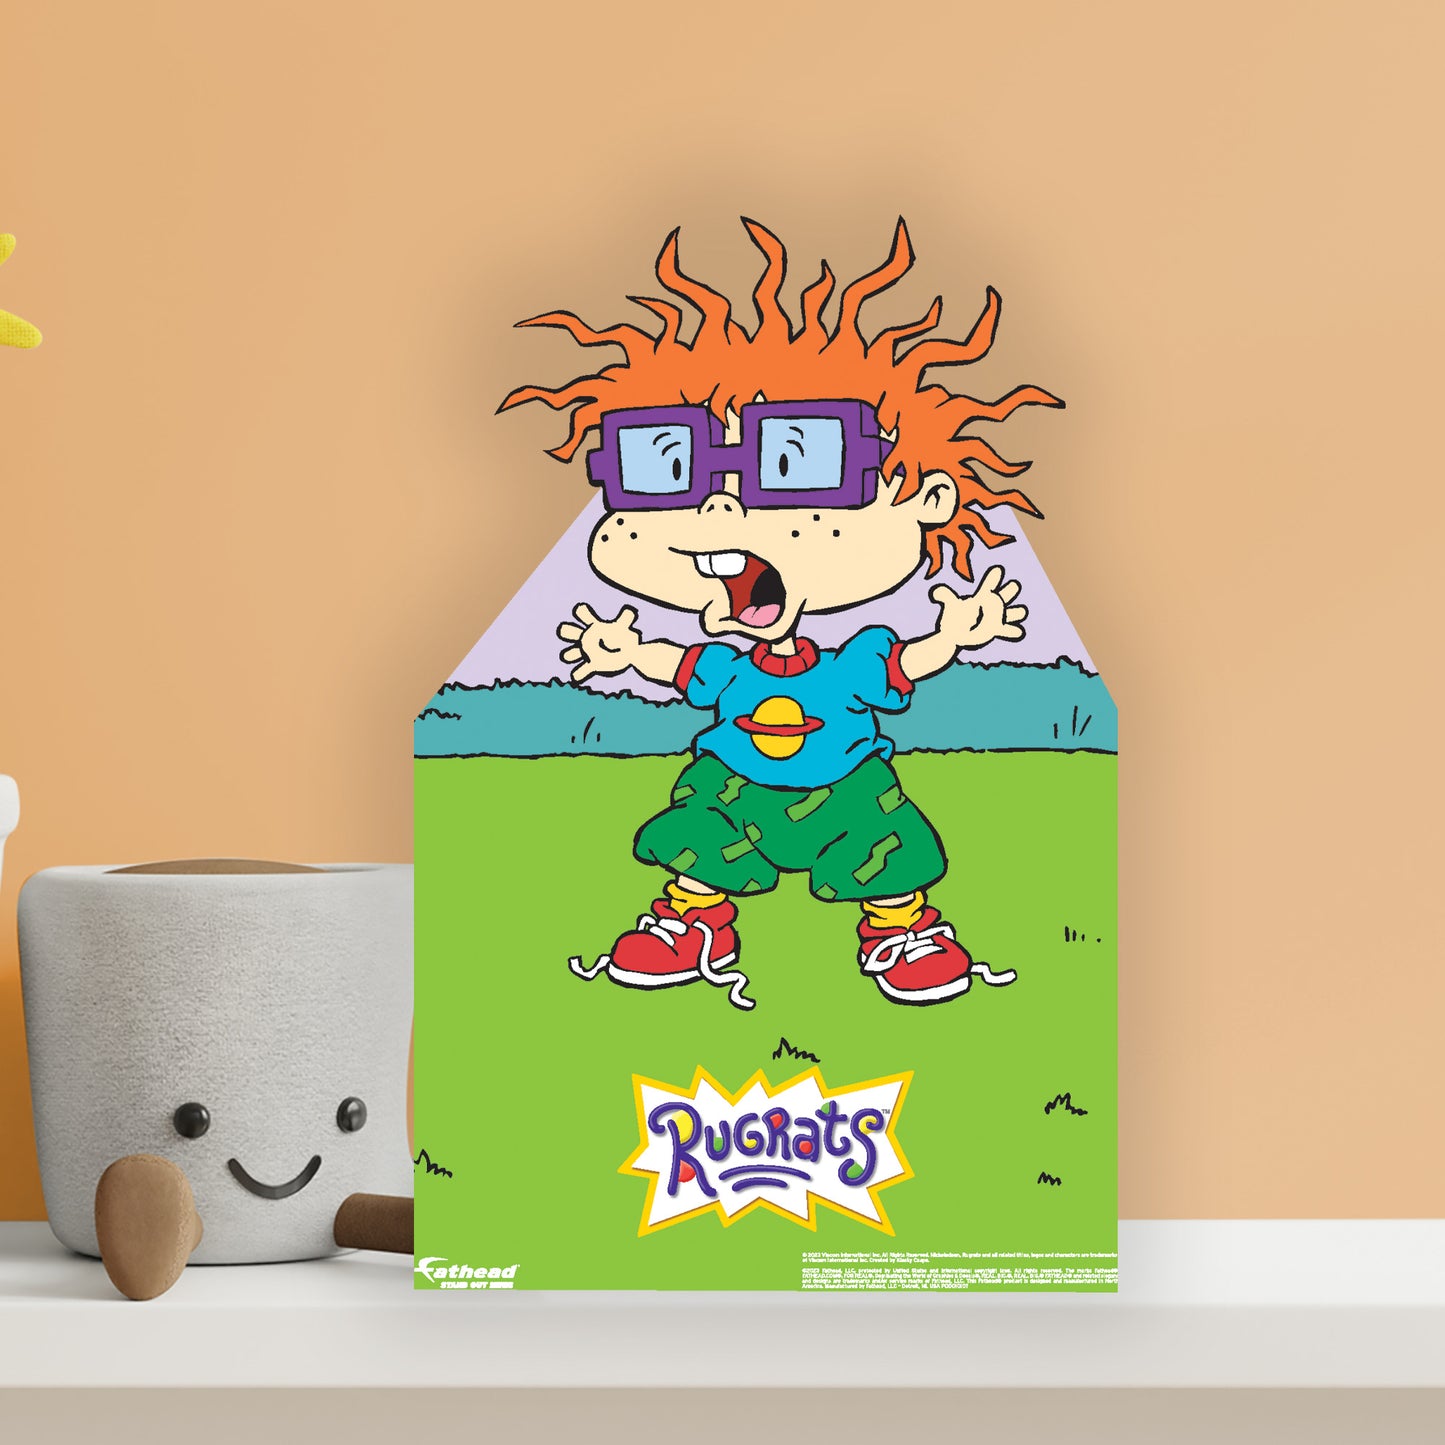 Rugrats: Chuckie Finster Mini   Cardstock Cutout  - Officially Licensed Nickelodeon    Stand Out